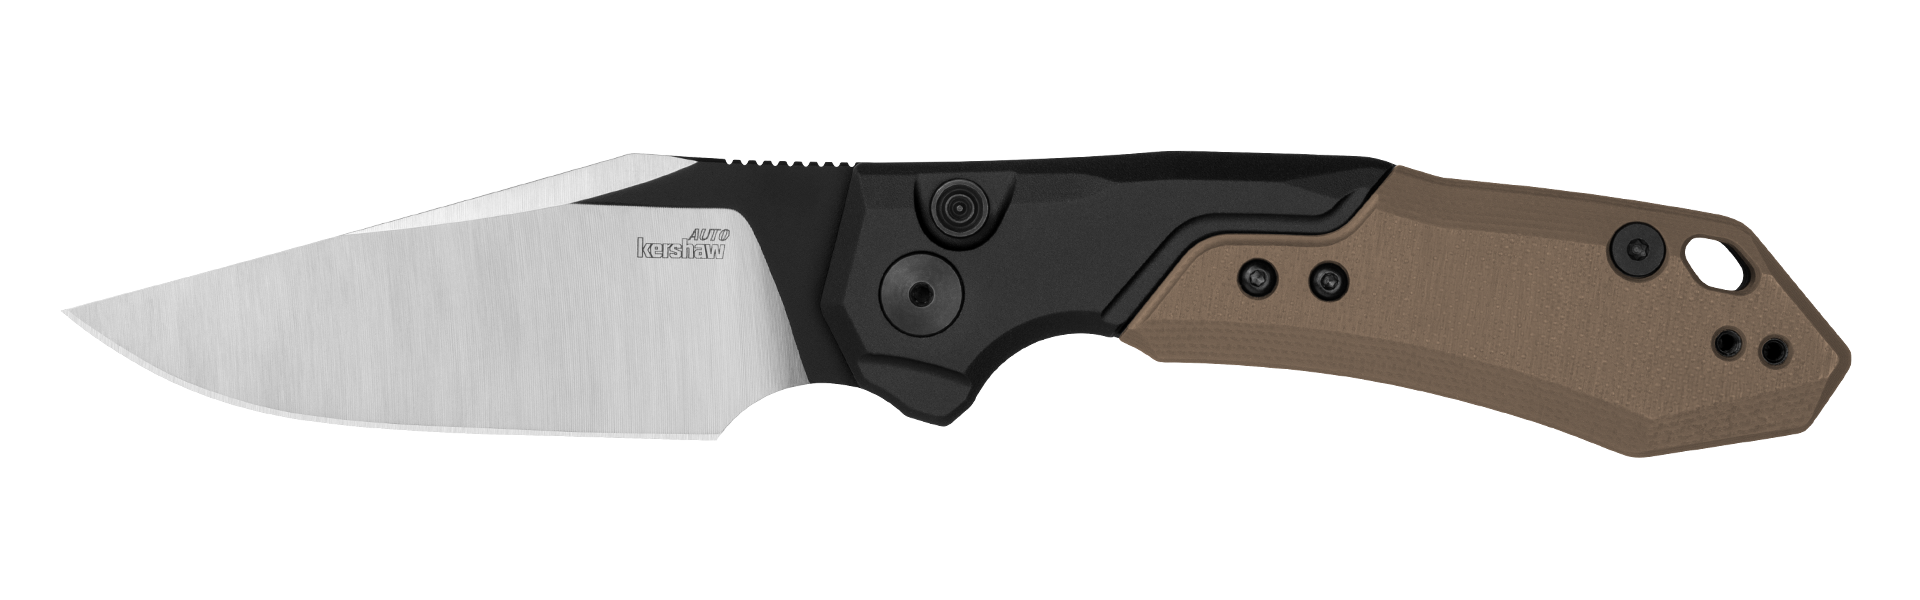 Kershaw Launch 19 - Automatic - Two-Tone Handle & Blade - 7851